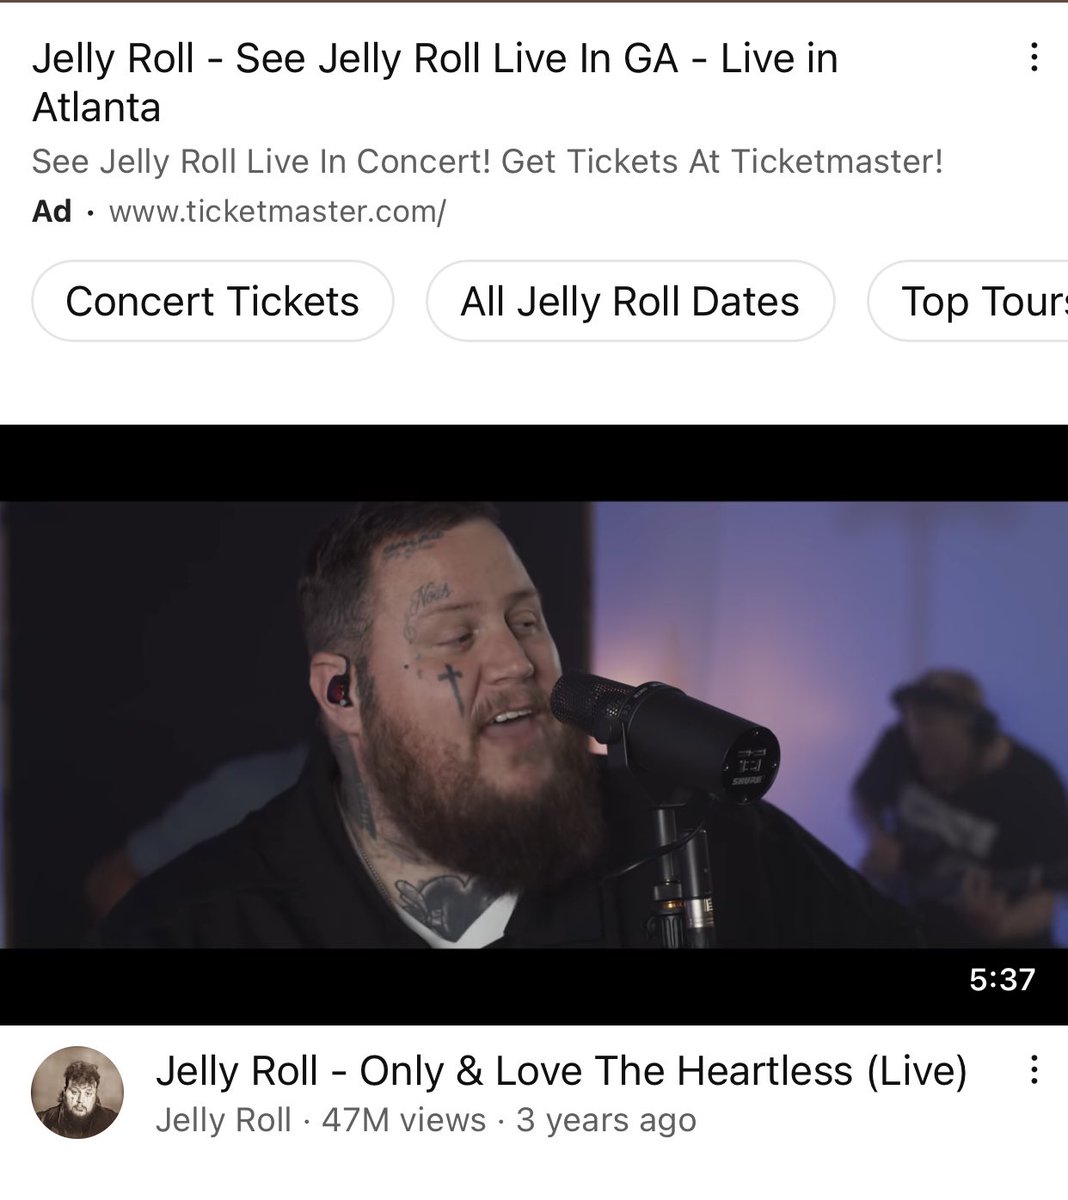 I was in a very bad space a couple years ago and a coworker played this and I ended up listening to all his music. Definitely going to watch this🫡 #JellyRoll #AddictionKills #TherapyIsNecessary #MensMentalHealth